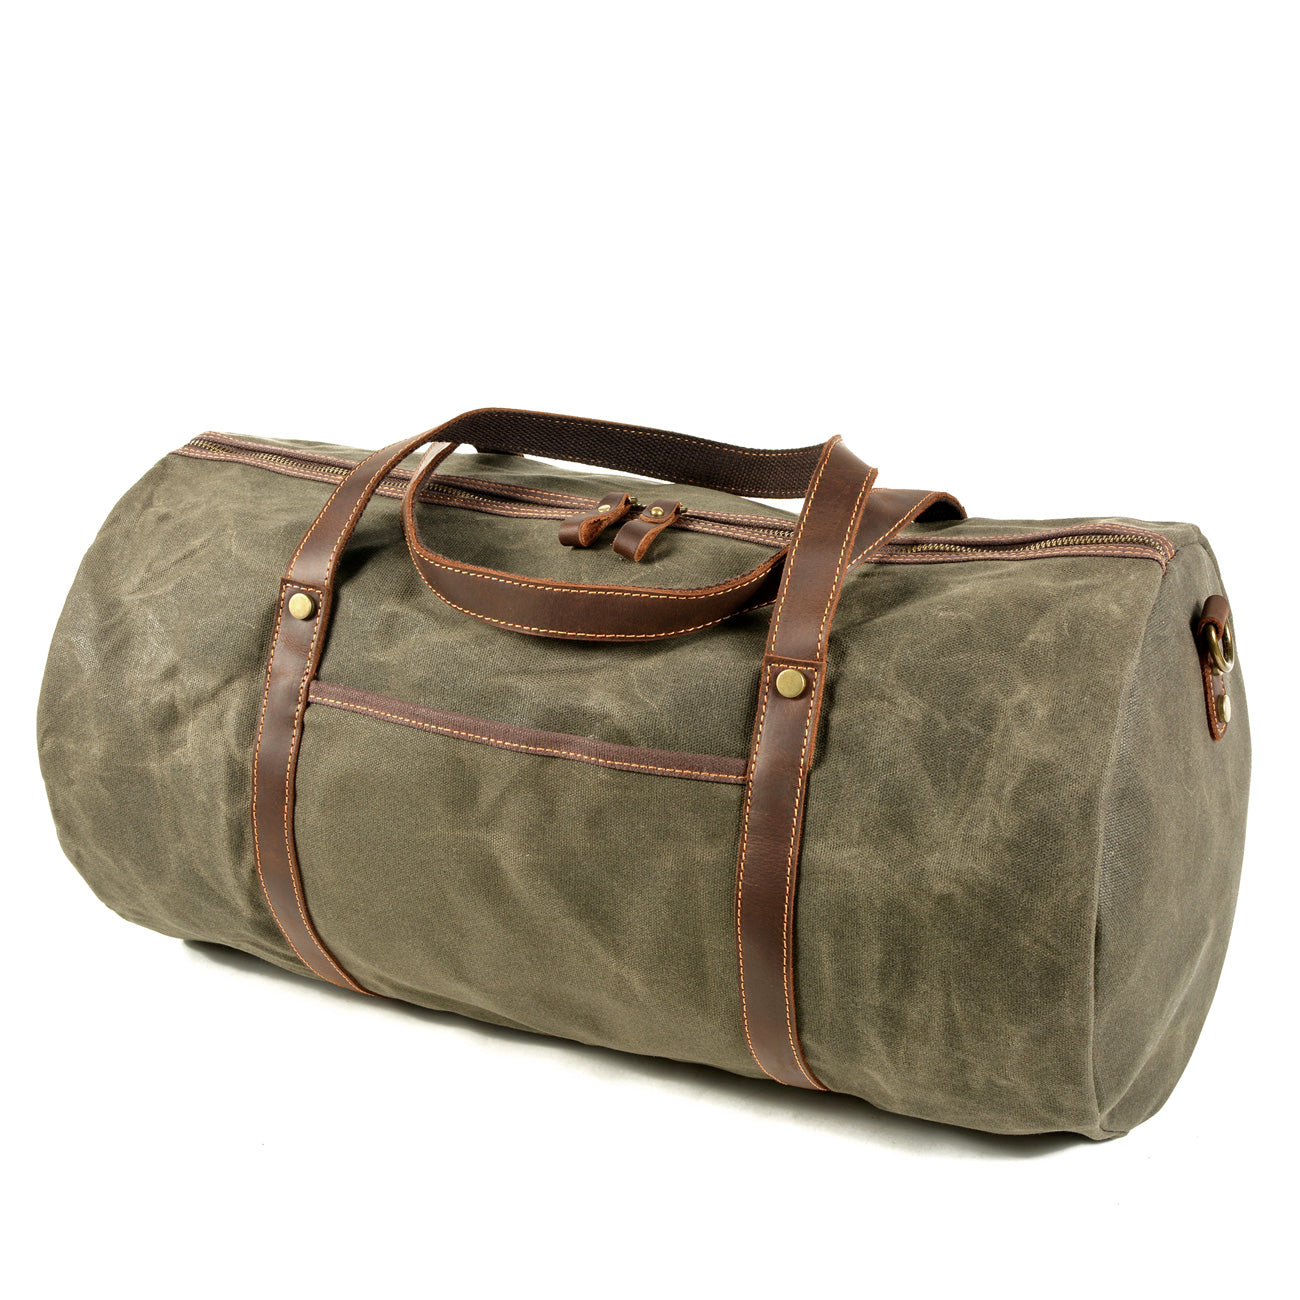 army green duffle bag without side-pockets